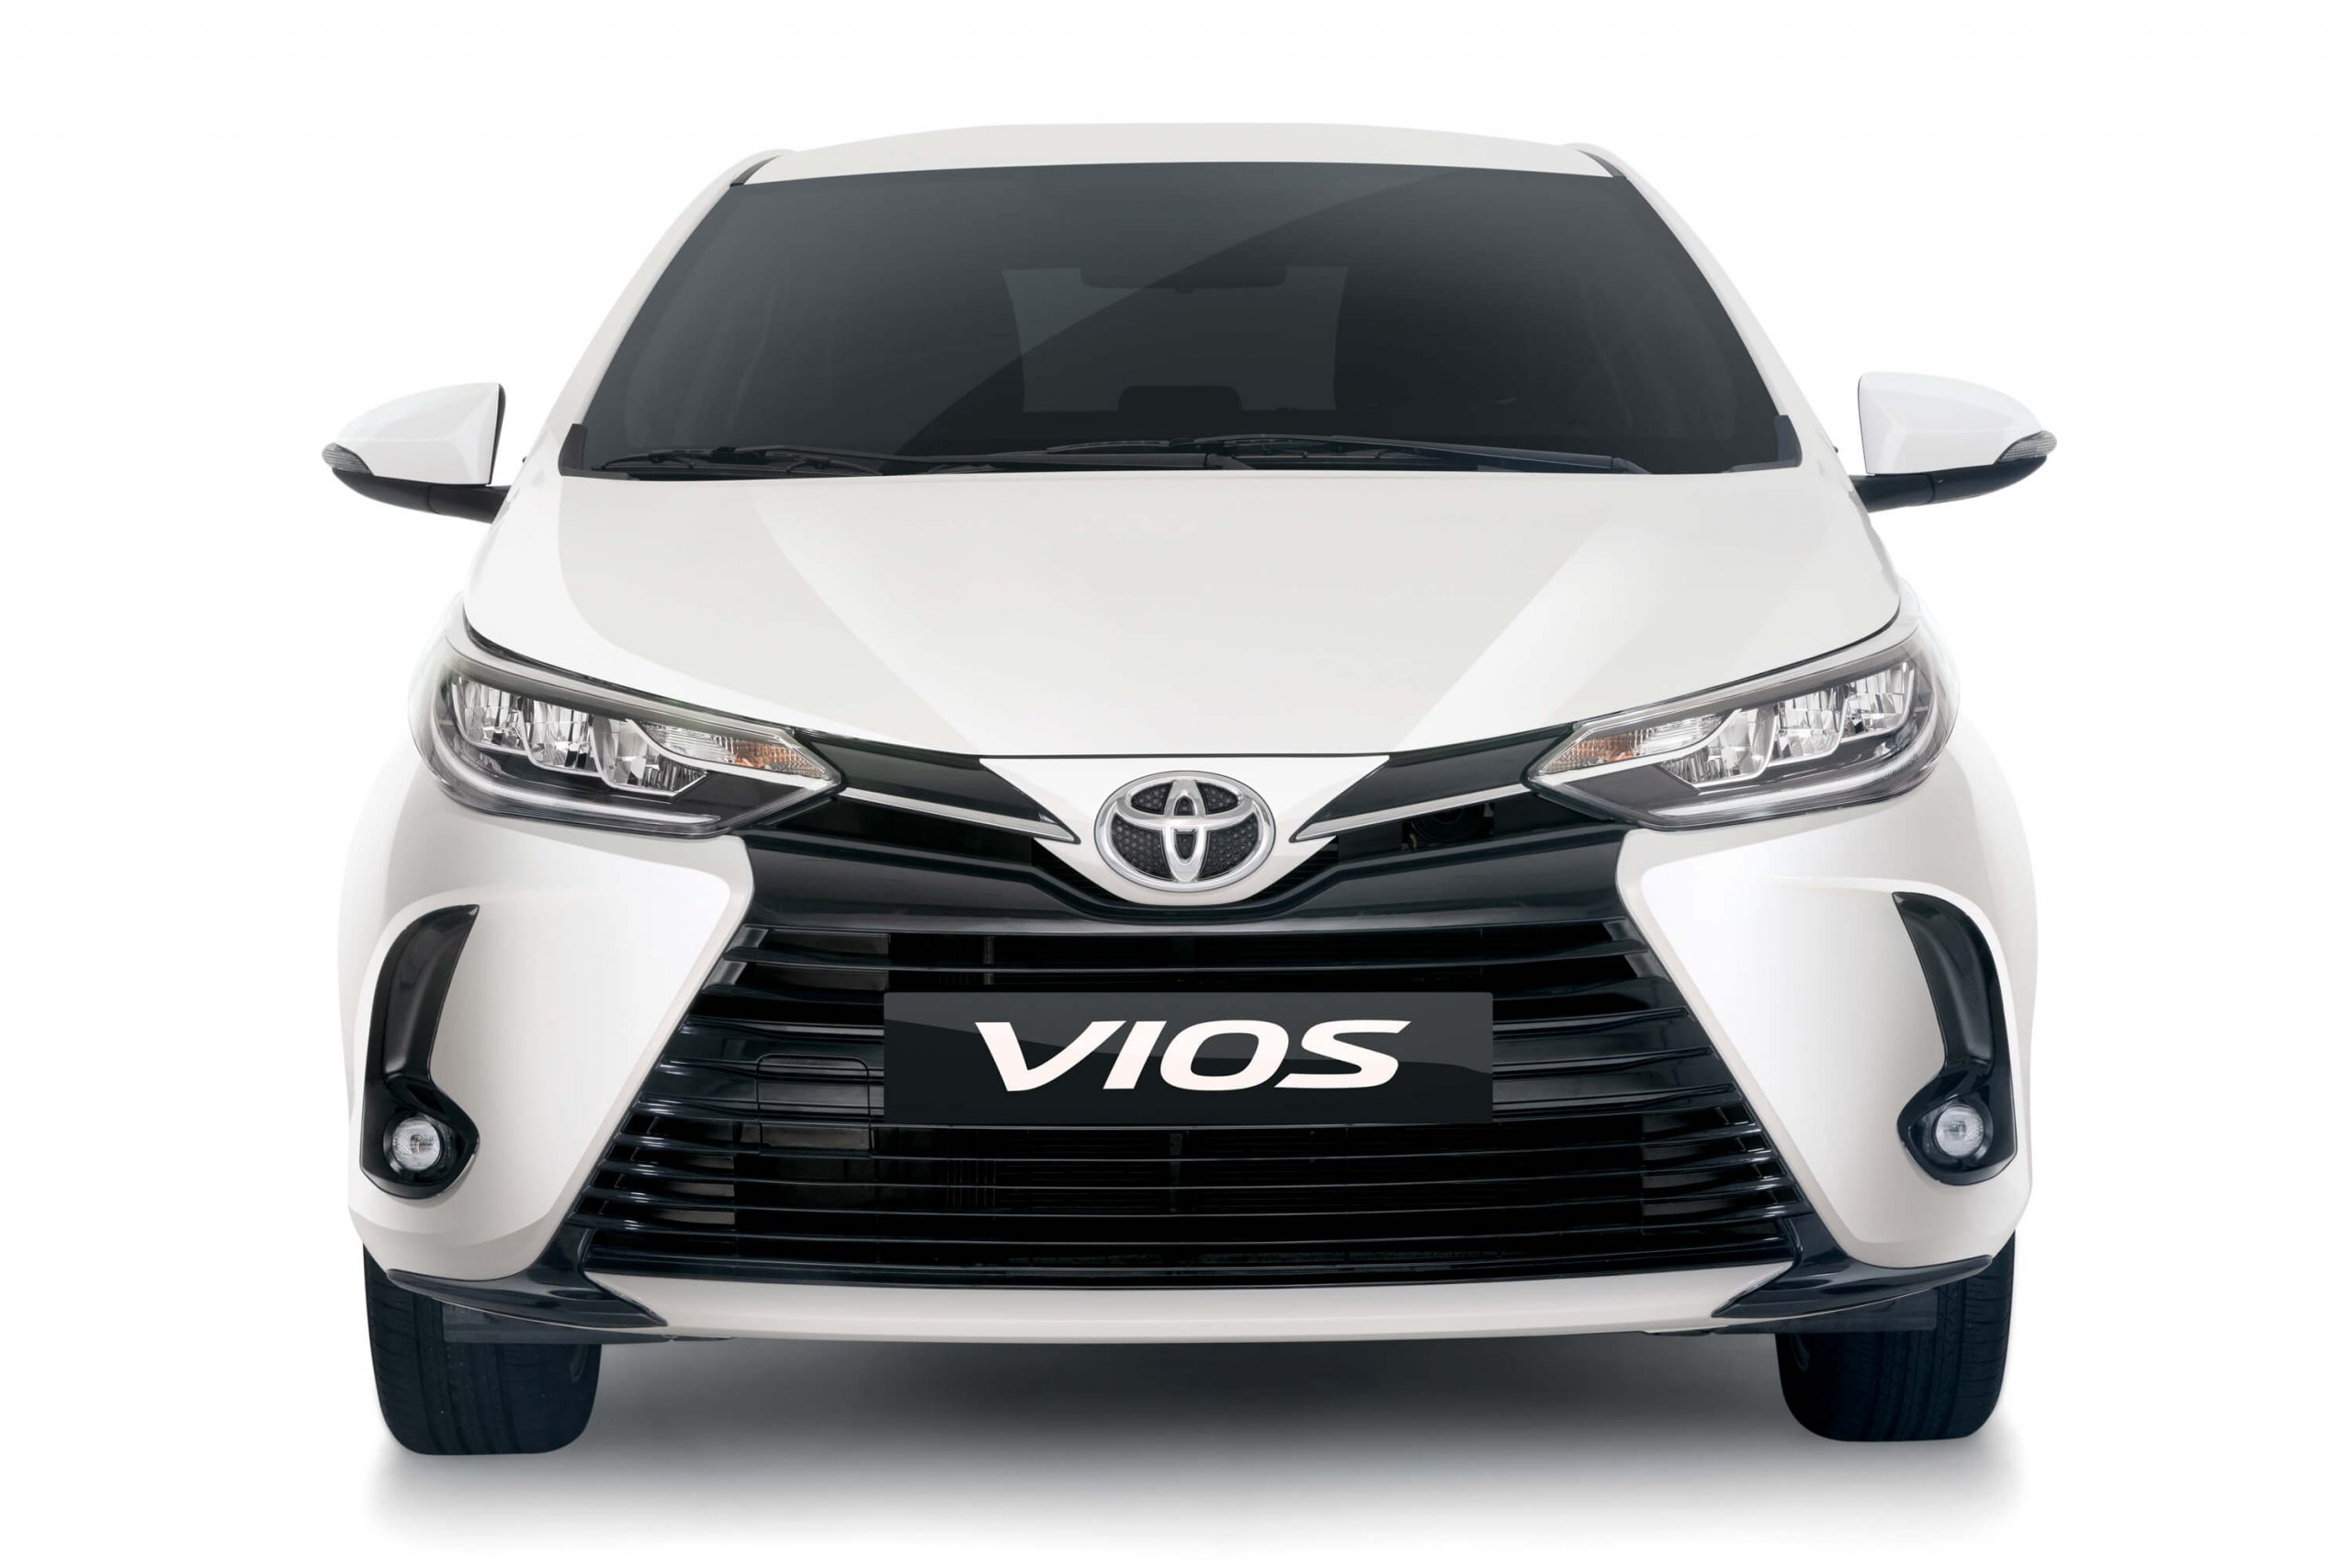 NUMBER 1. The Vios has established its position as the number 1 passenger car in the Philippines with almost 320,000 units sold across 3 generations of the model. In 2019, the Vios ended the year with a 38.6% market share in its segment.